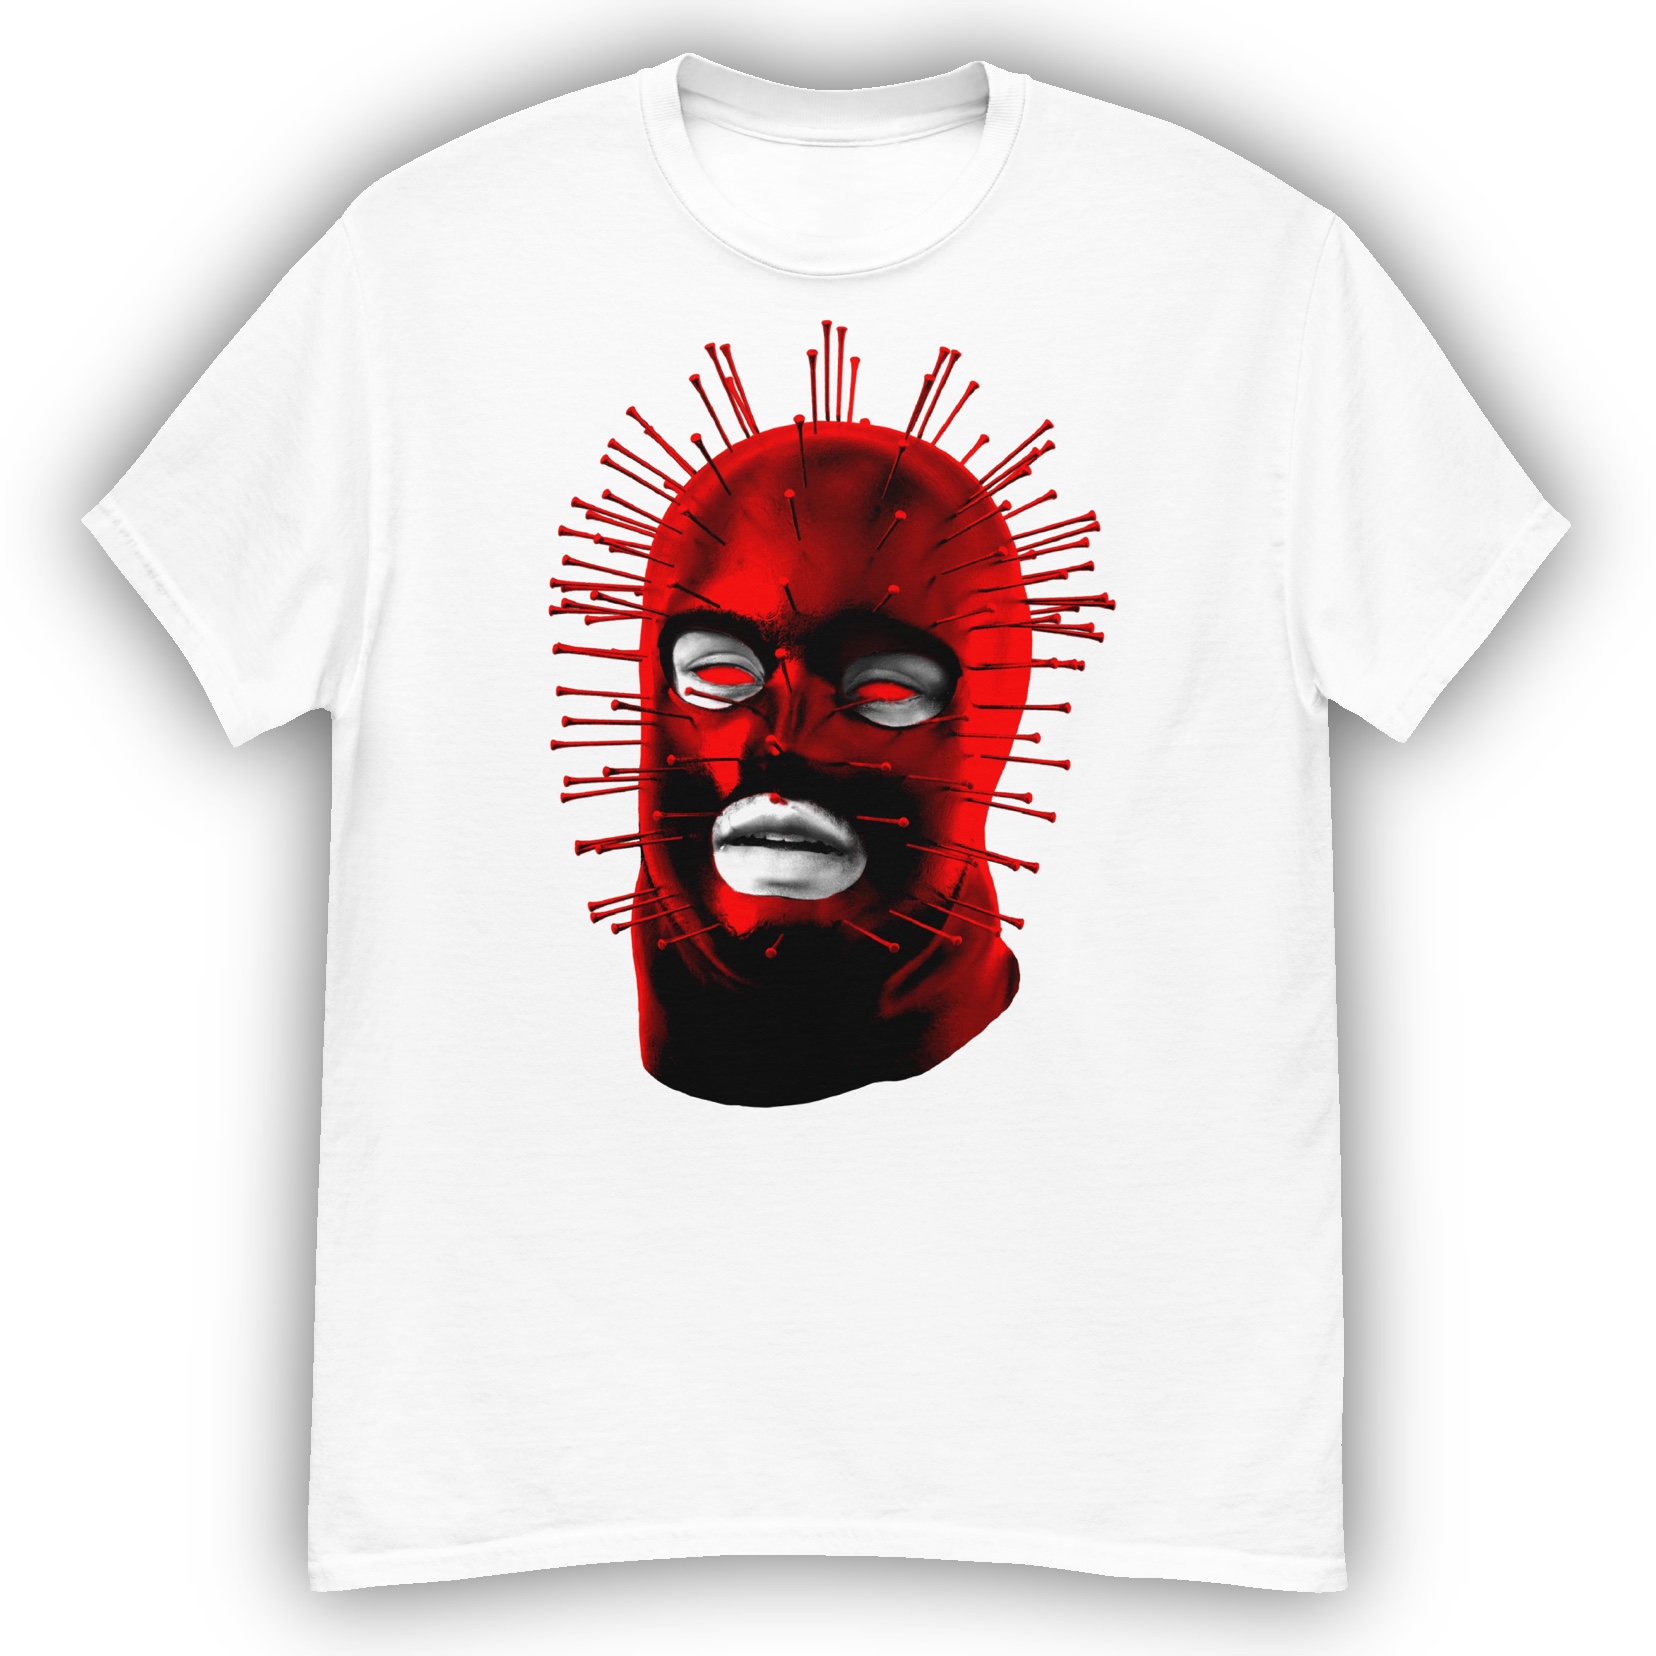 Featured image for “Red gimp spike - Men's classic Gildan tee”